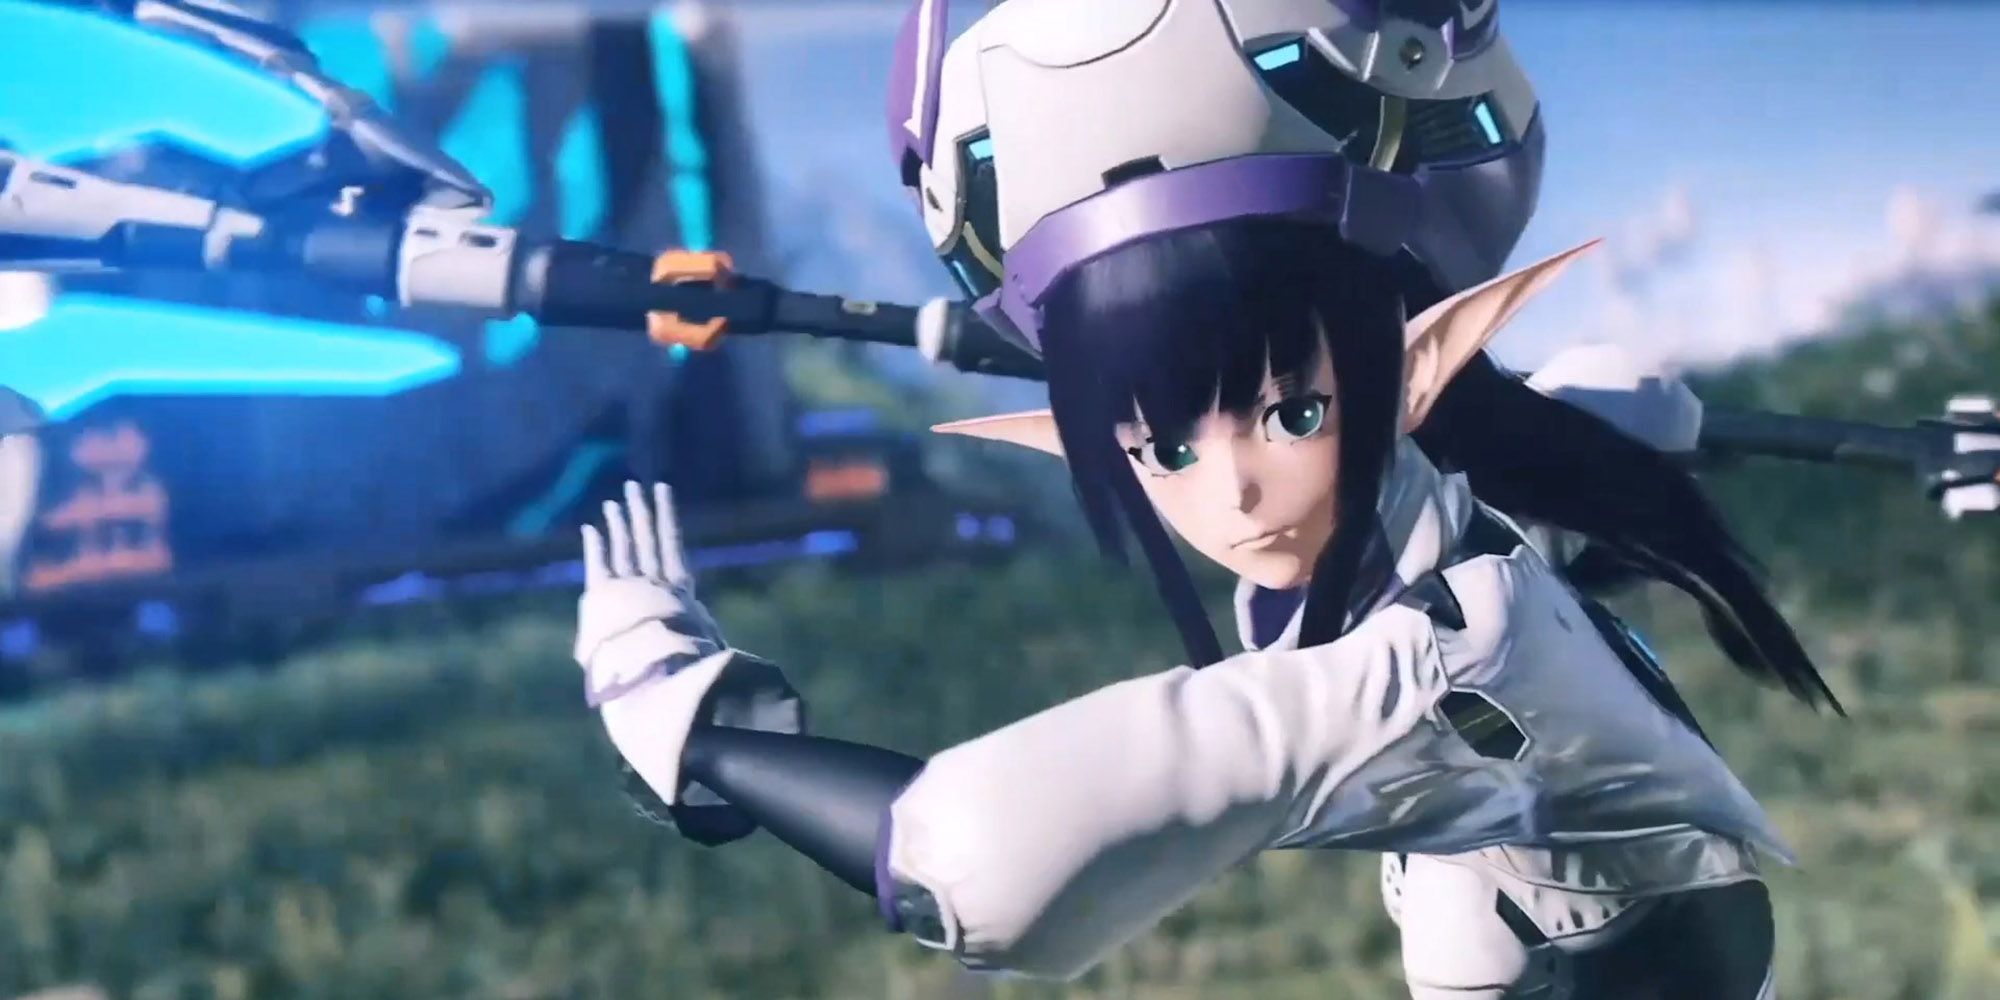 Phantasy Star Online 2: New Genesis - What the Latest Prologue Revealed